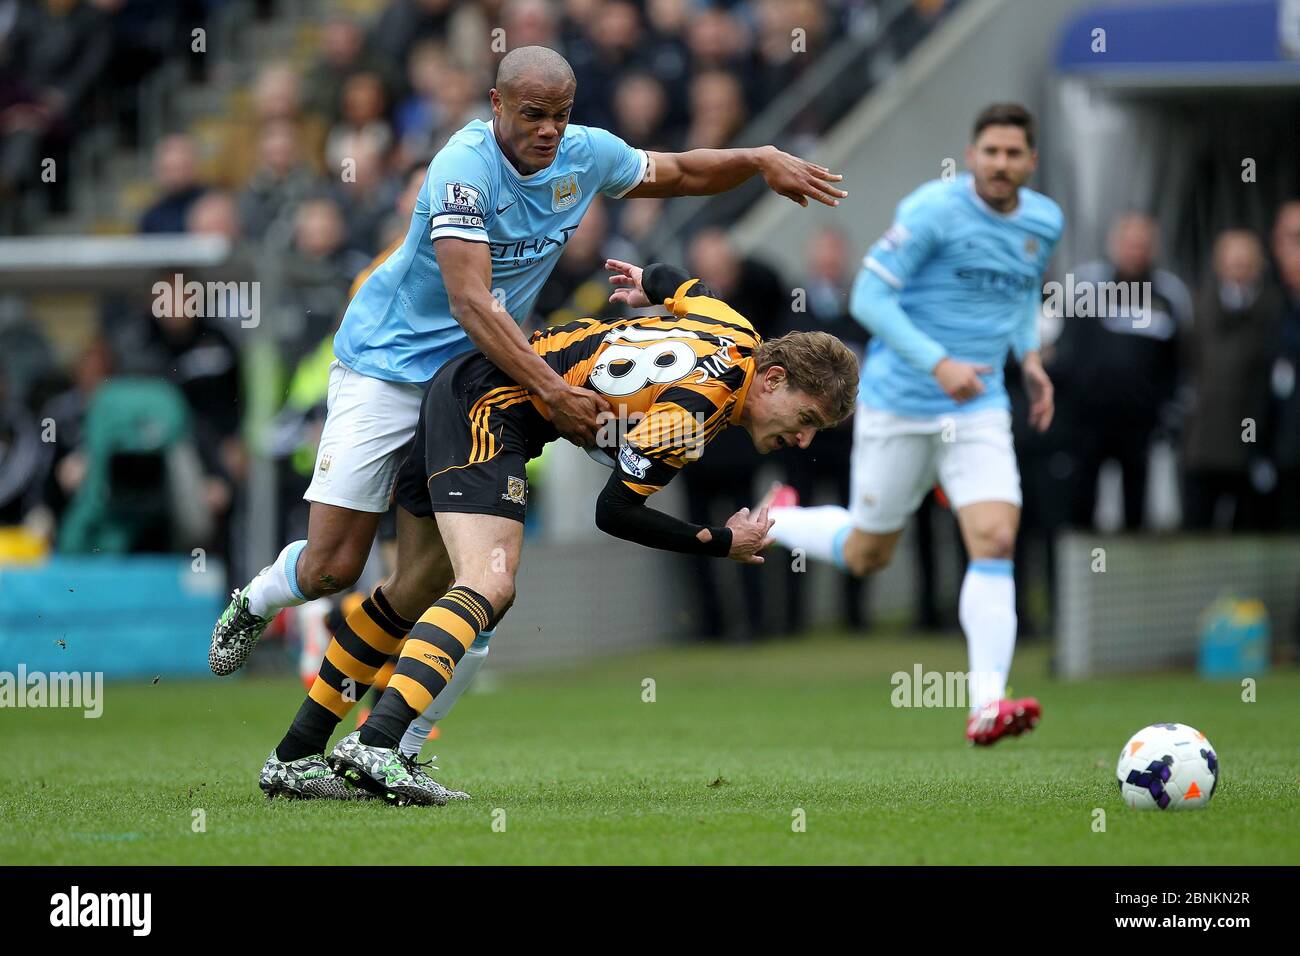 KINGSTON UPON HULL, ENGLAND - Vincent Kompany of Manchester City grapples with Nico Jelavic of Hull City during the Premier League match between Hull City and Manchester City at the KC Stadium, Kingston upon Hull on Saturday 15th March 2014 (Credit: Mark Fletcher | MI News) Stock Photo